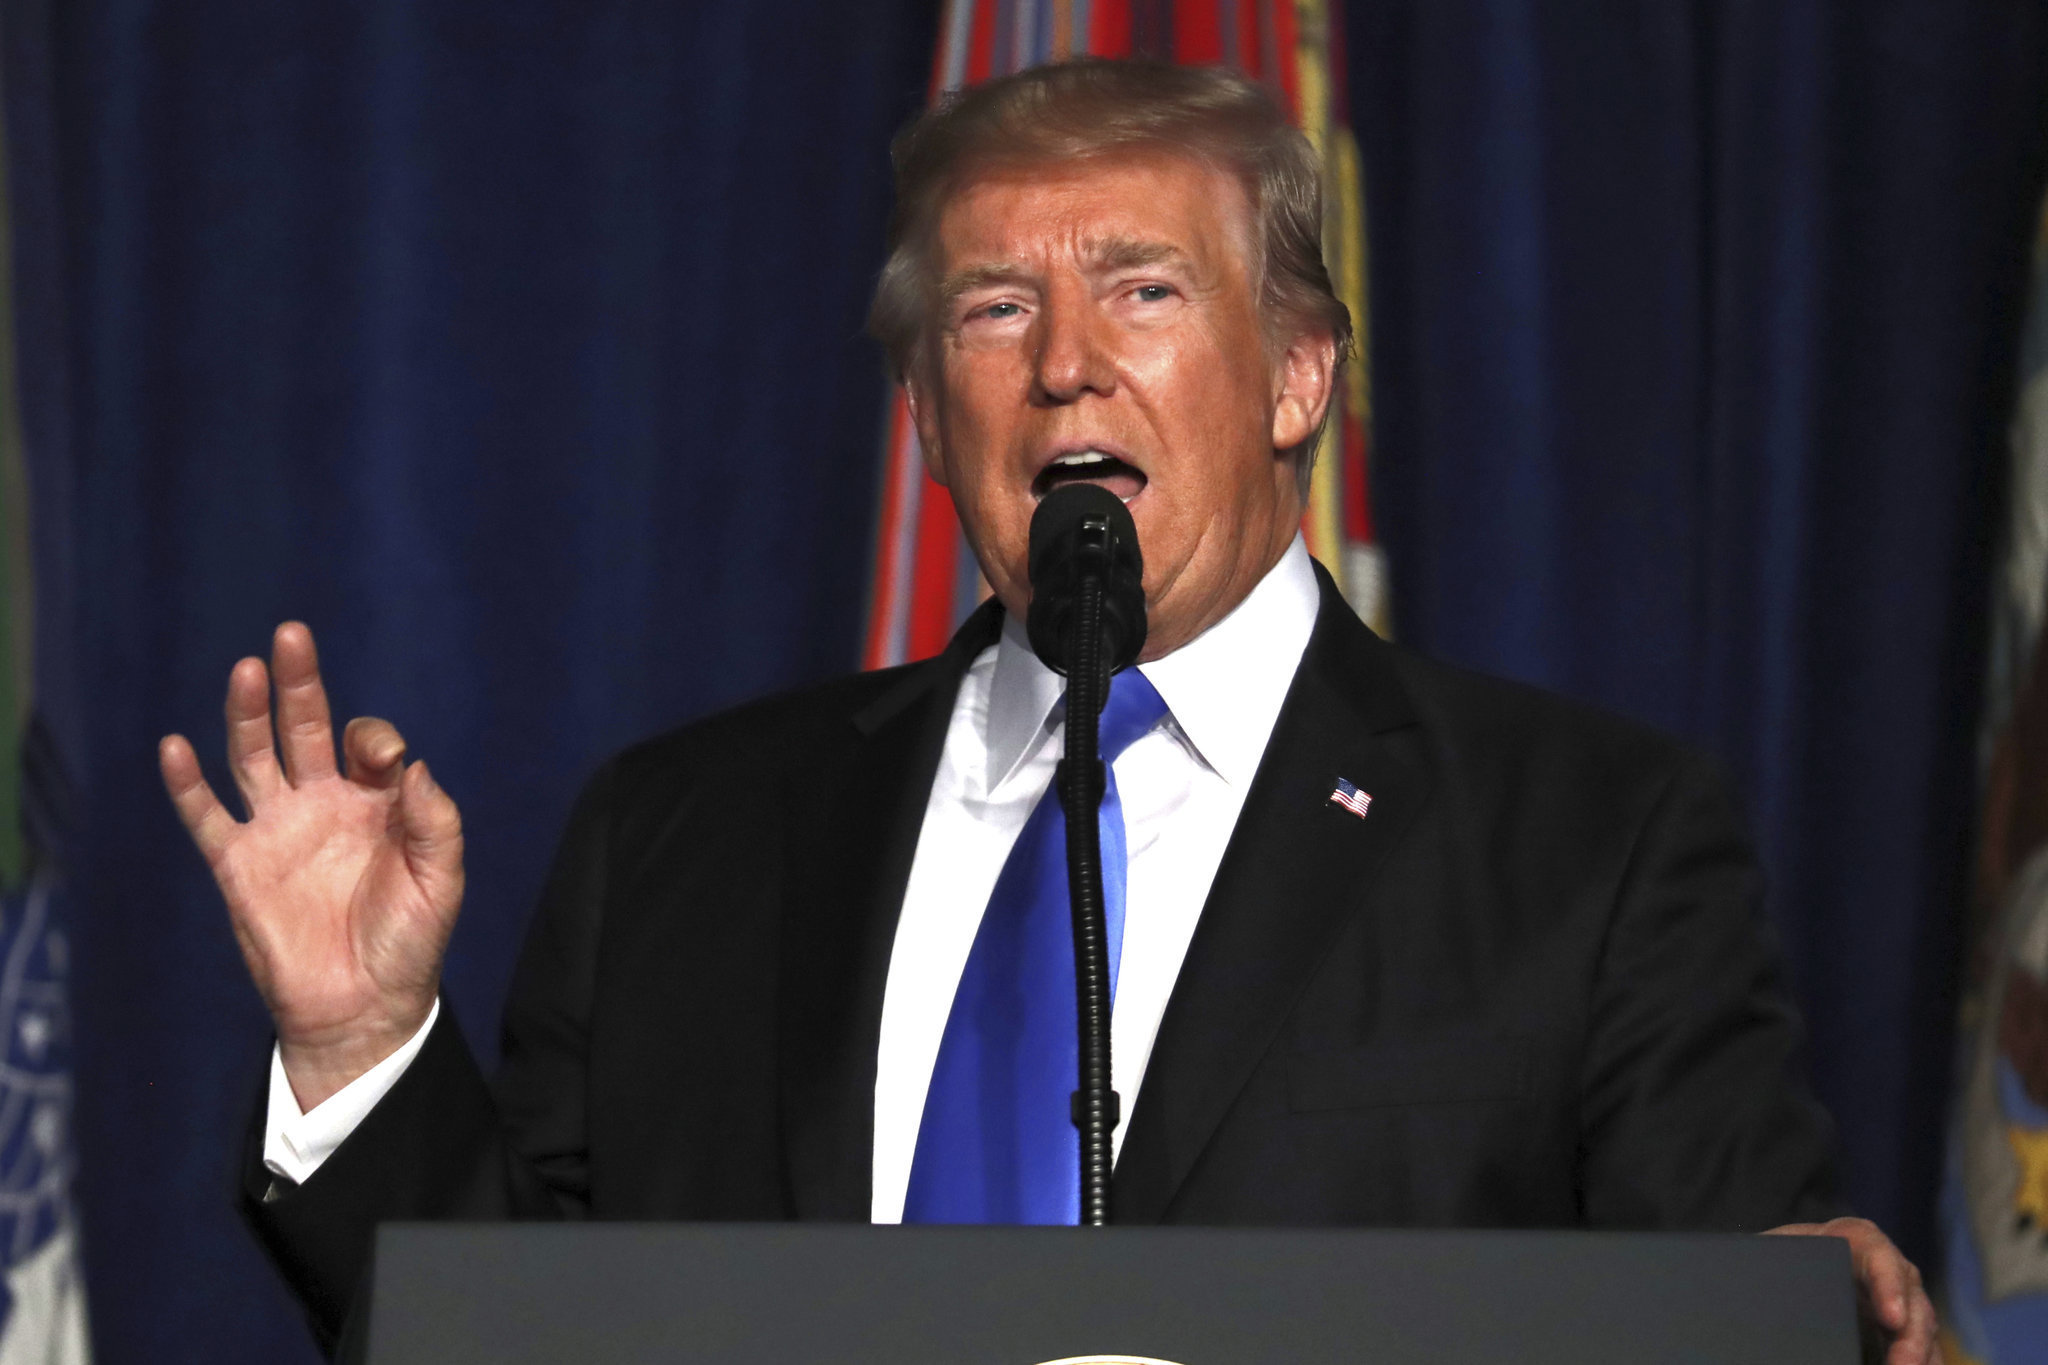 Trump: US can't afford quick Afghanistan withdrawal, must continue the fight